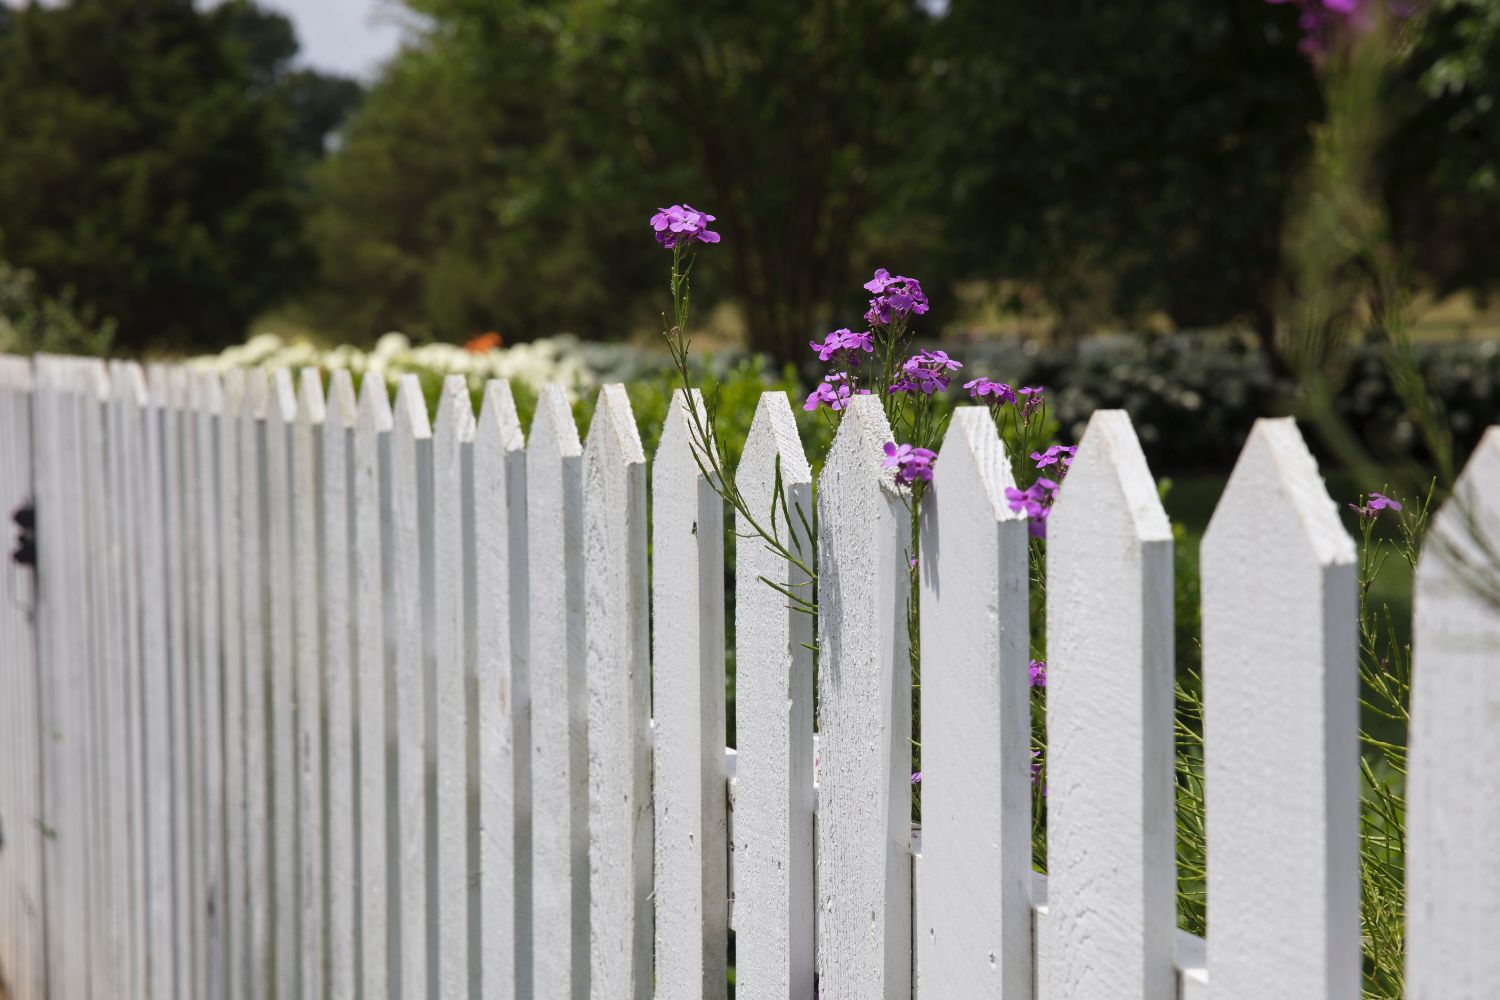 How Tall Should Your Fence Be for a Garden?